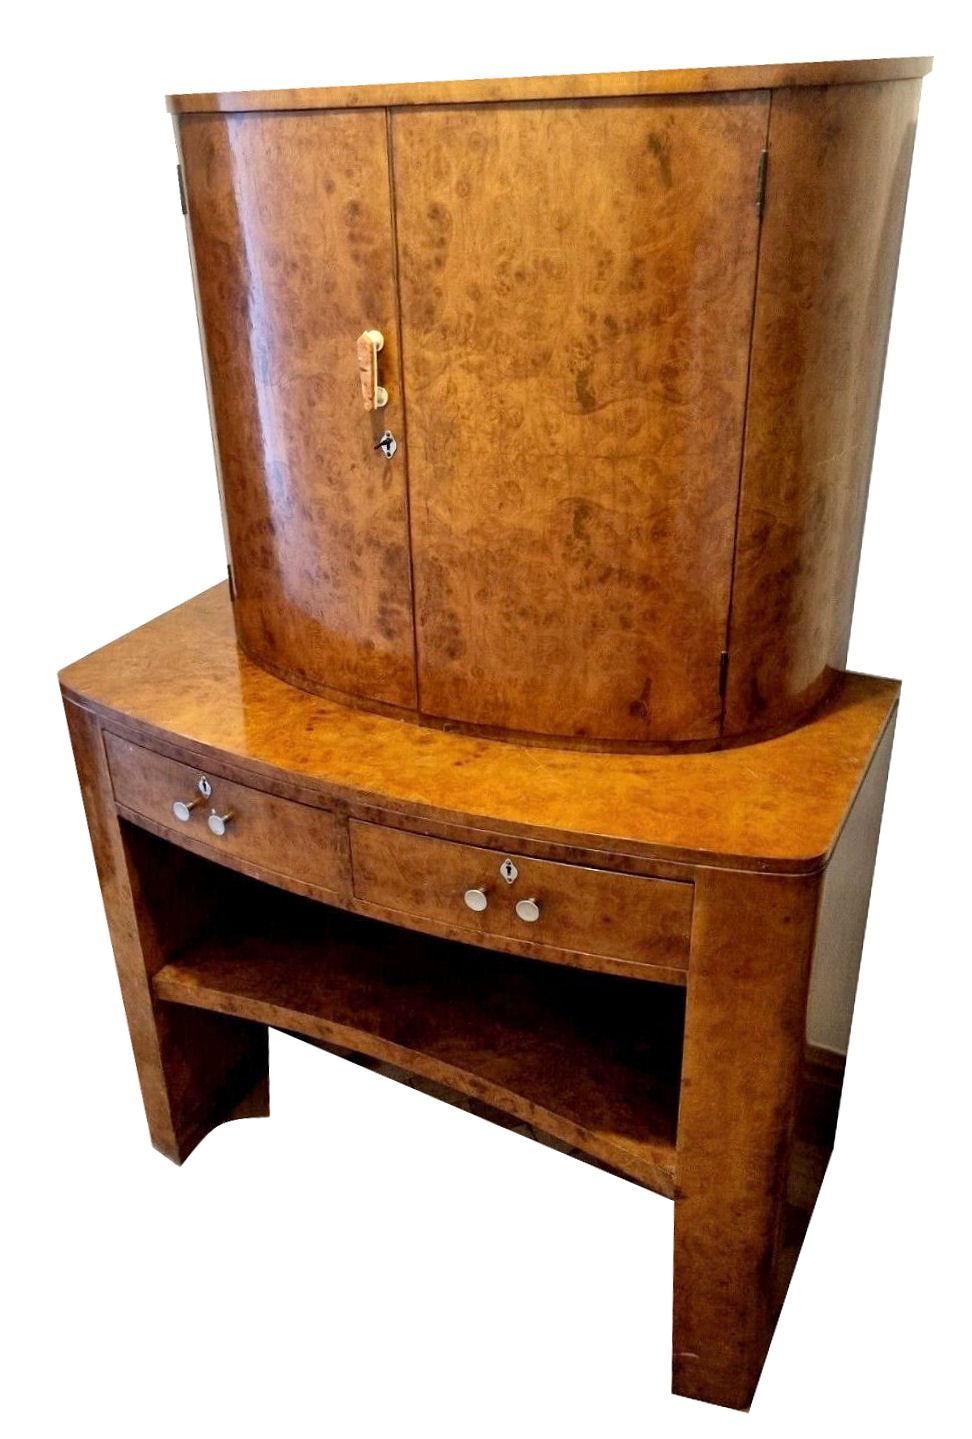 Mirror Art Deco Burr Walnut Drinks Cocktail Cabinet, Dry Bar, by H & L Epstein, C1930 For Sale